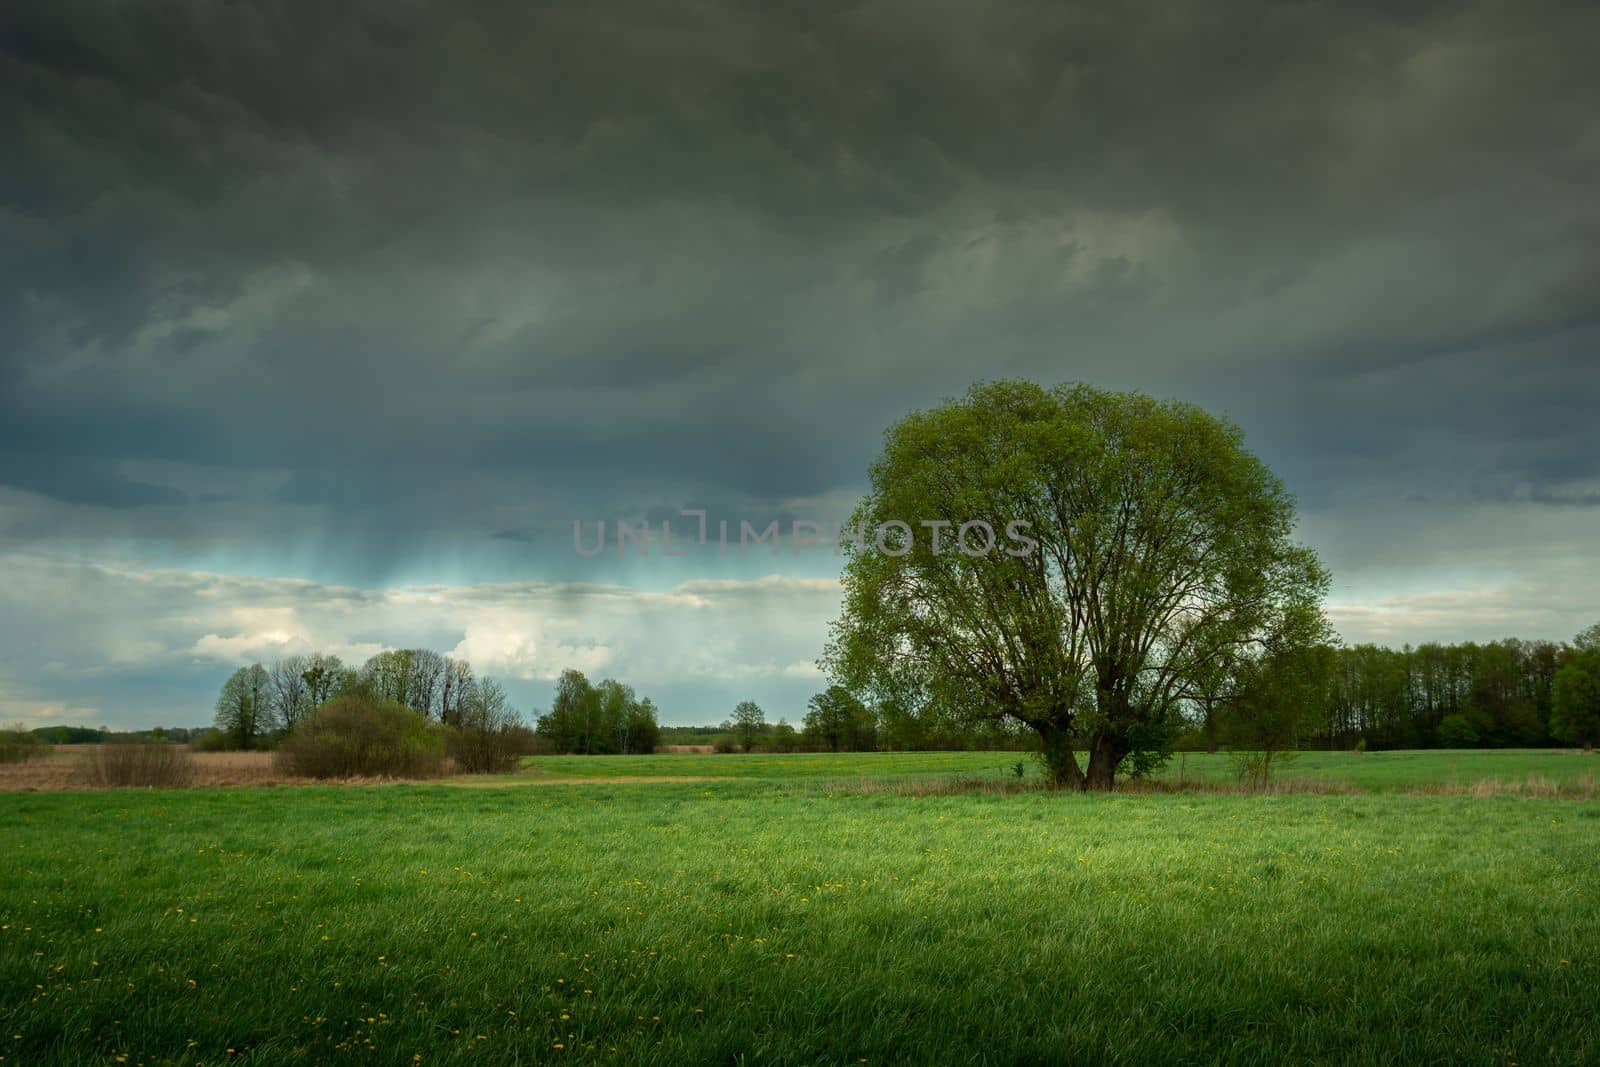 Big tree in the meadow and rainy sky by darekb22